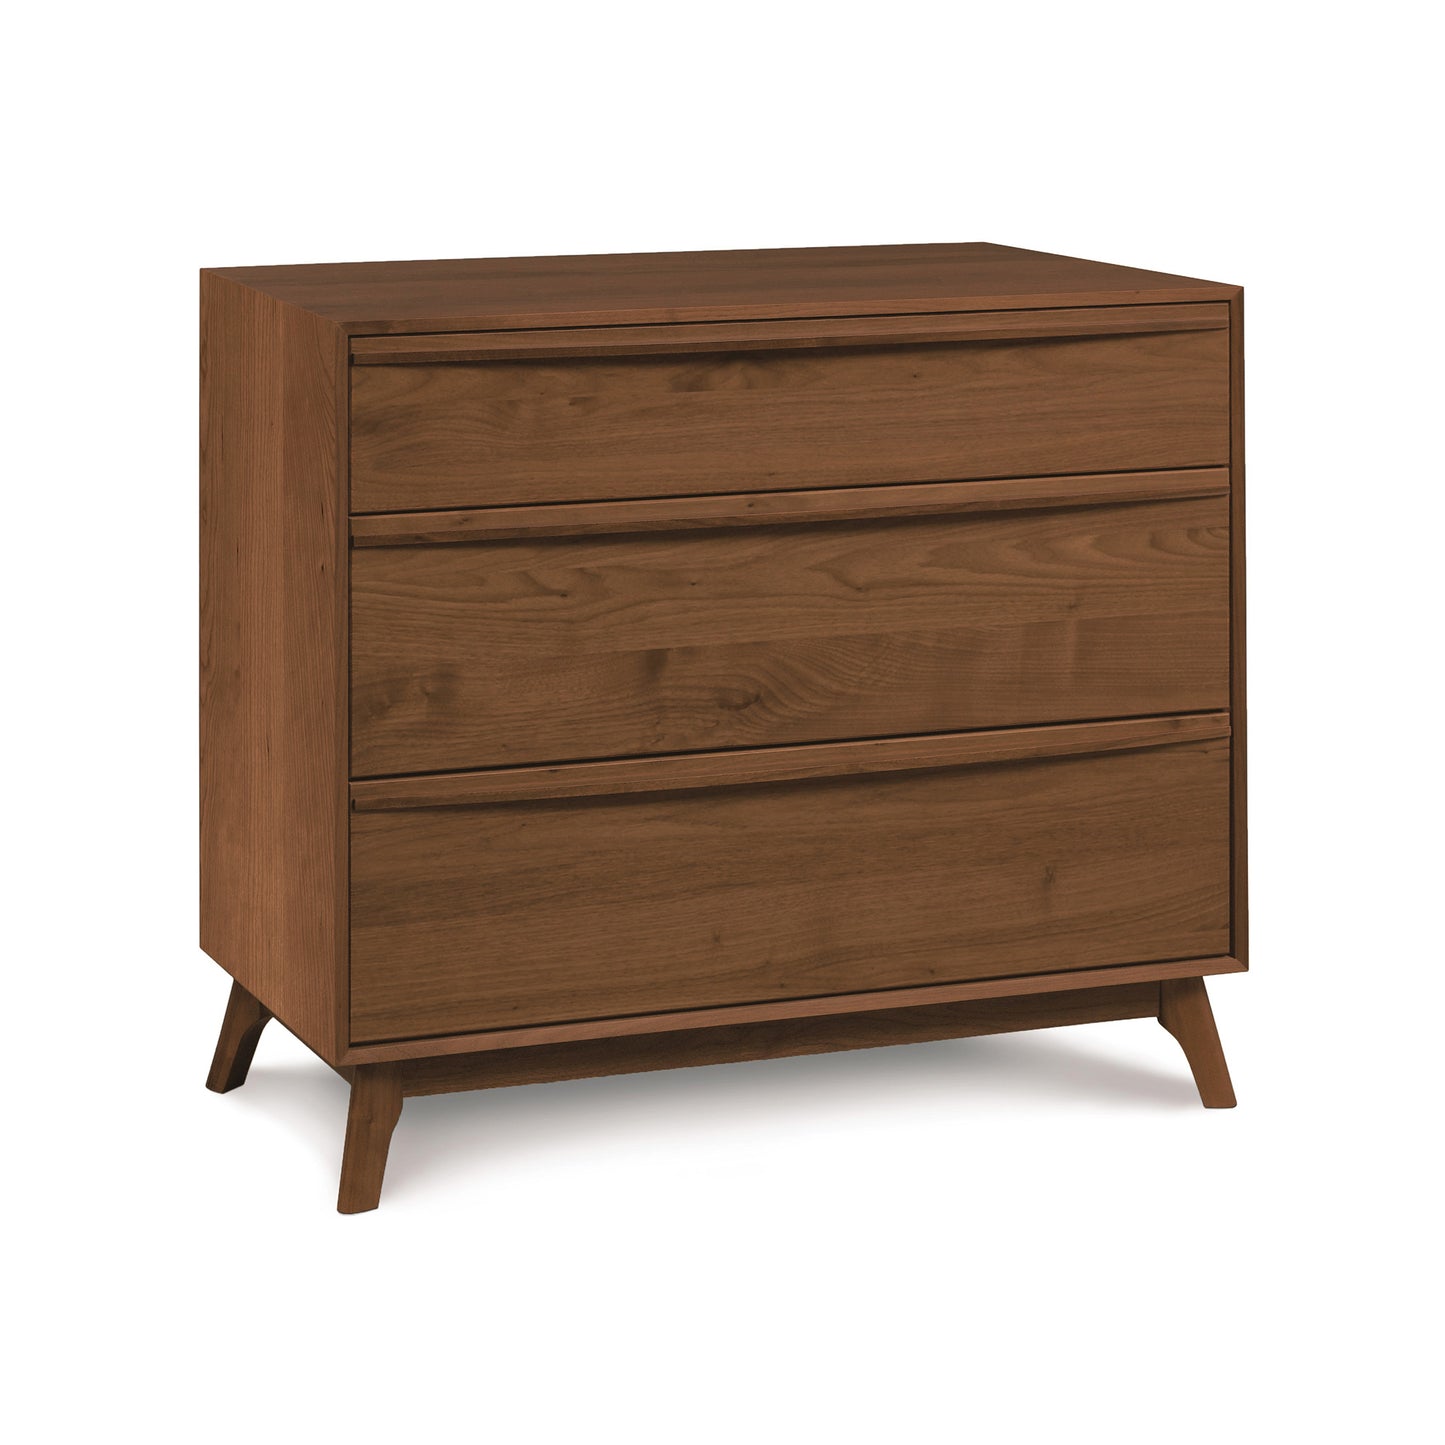 The Copeland Furniture Catalina 3-Drawer Chest is a modern chest of drawers with wooden legs, perfect for a modern bedroom.